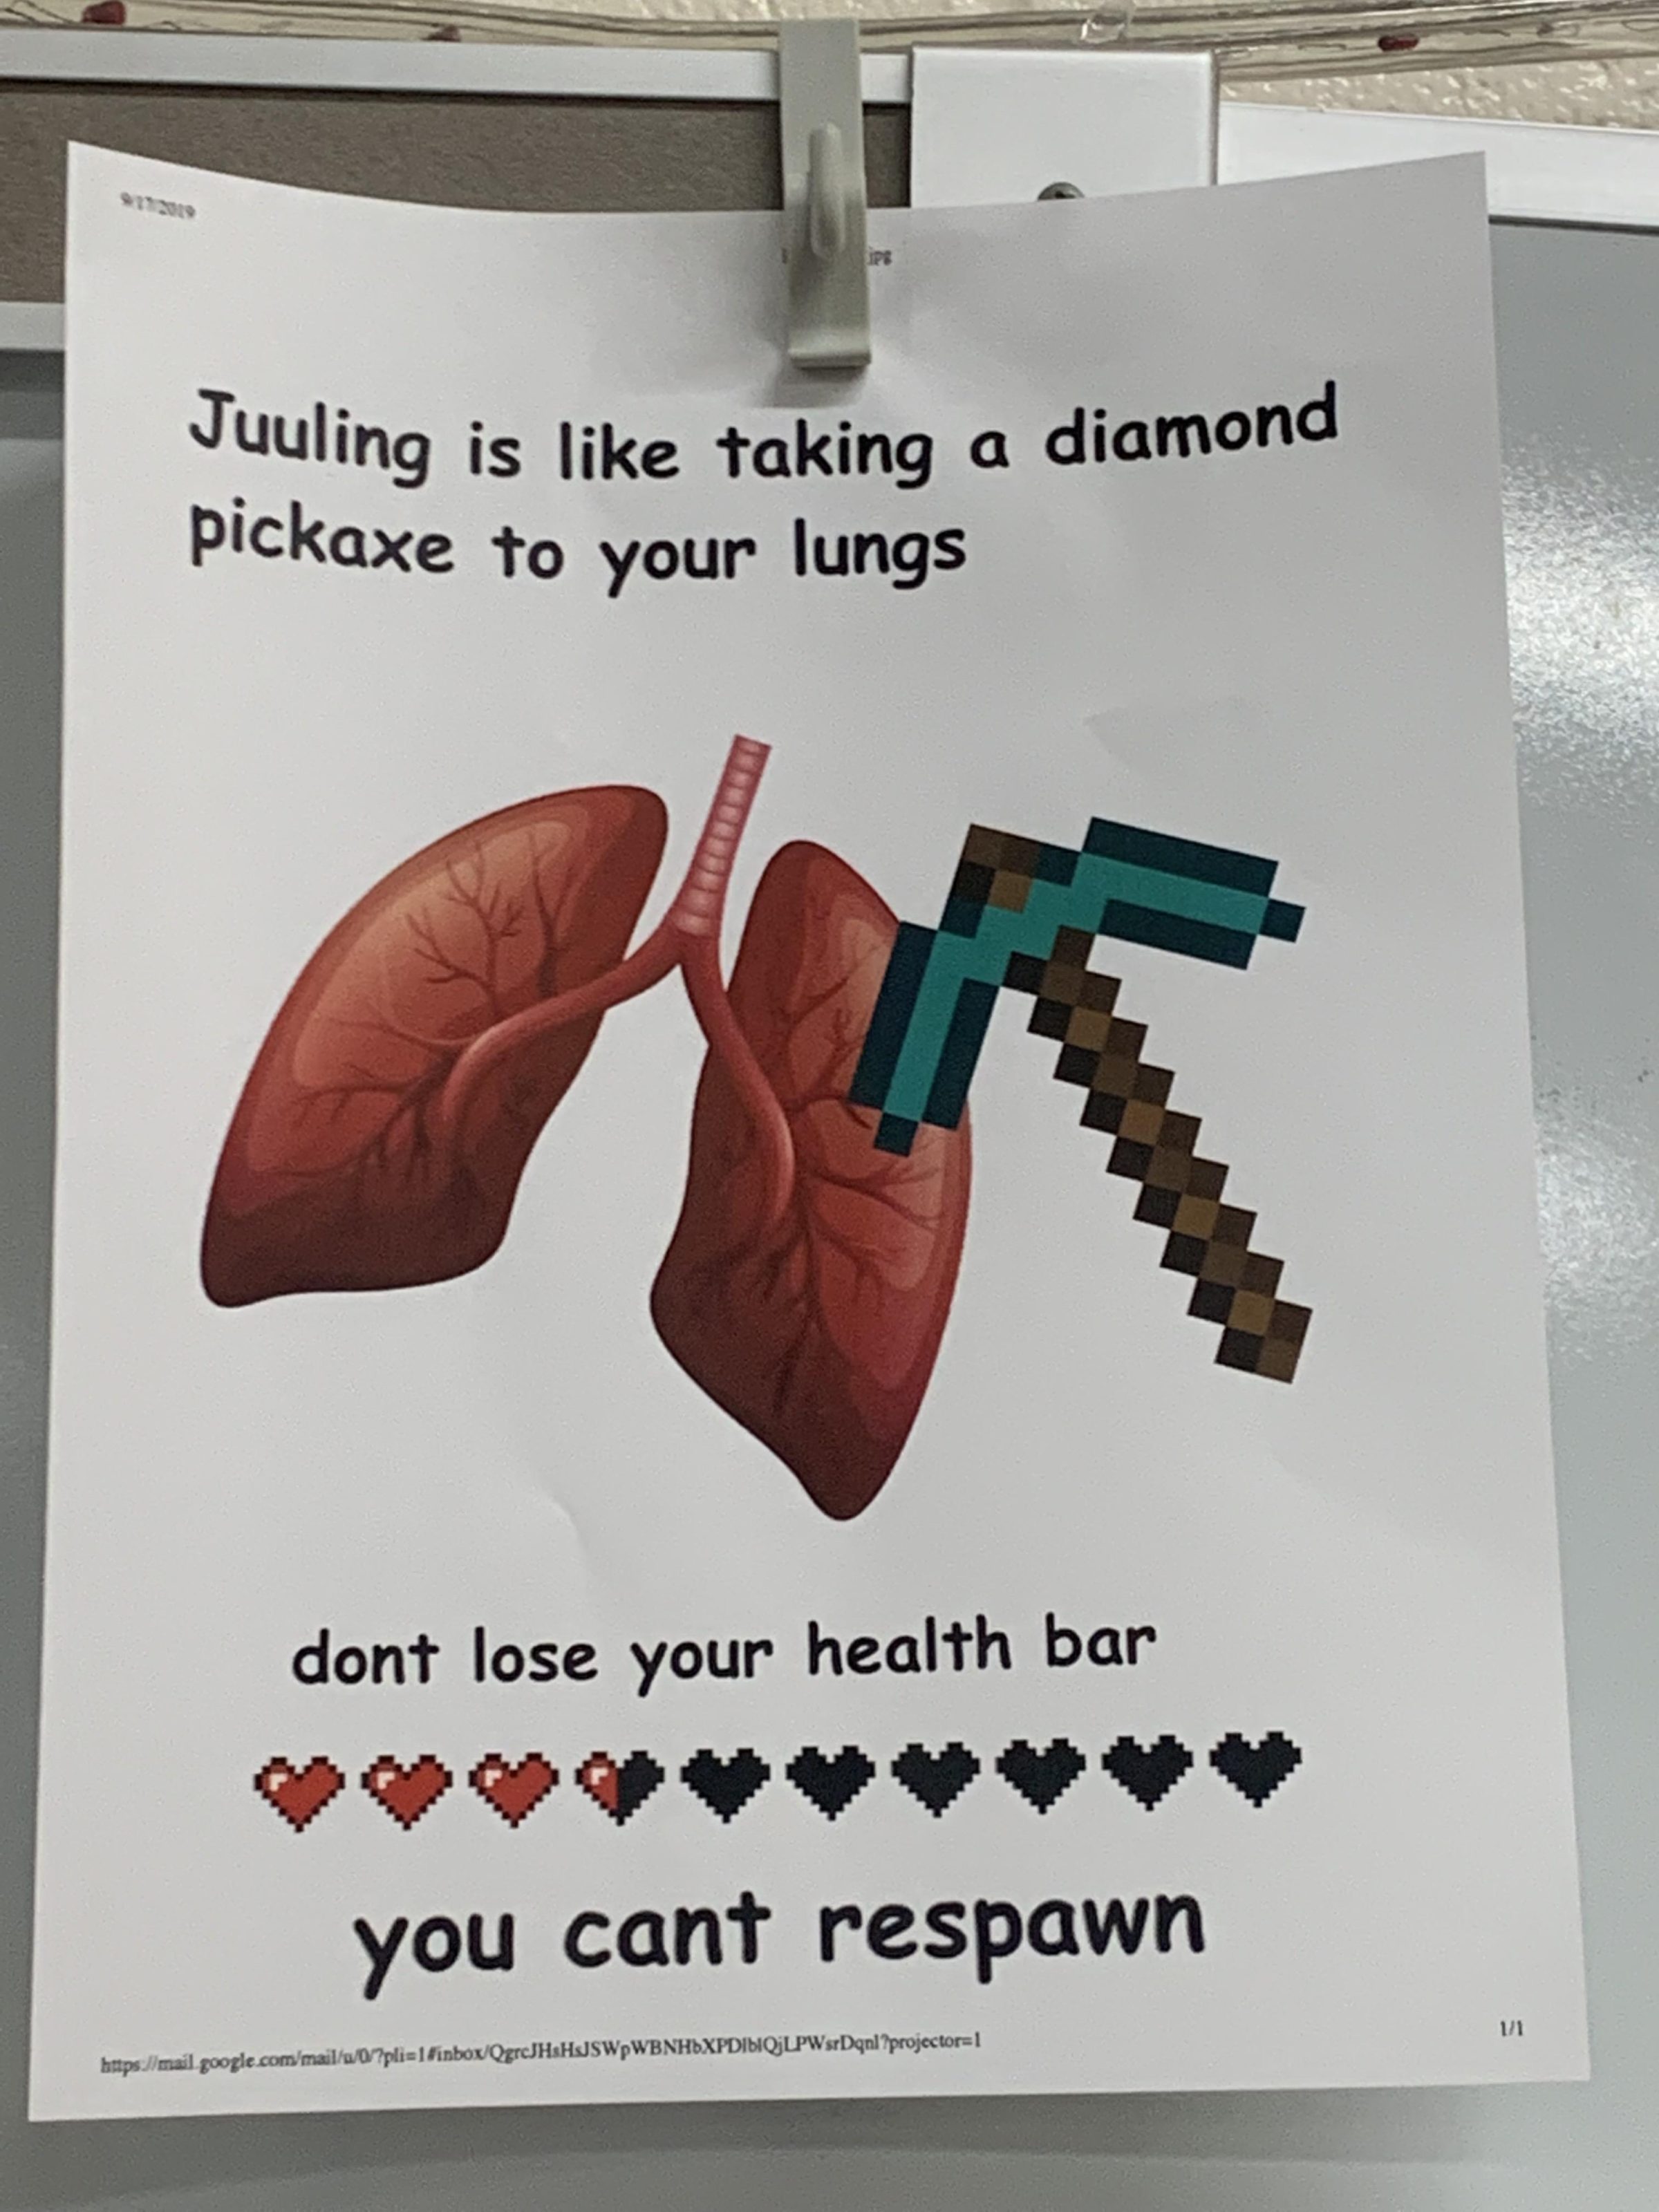 minecraft minecraft-memes minecraft text: juuling is like taking a diamond pickaxe to your lungs dont lose your health bar you cant respawn 